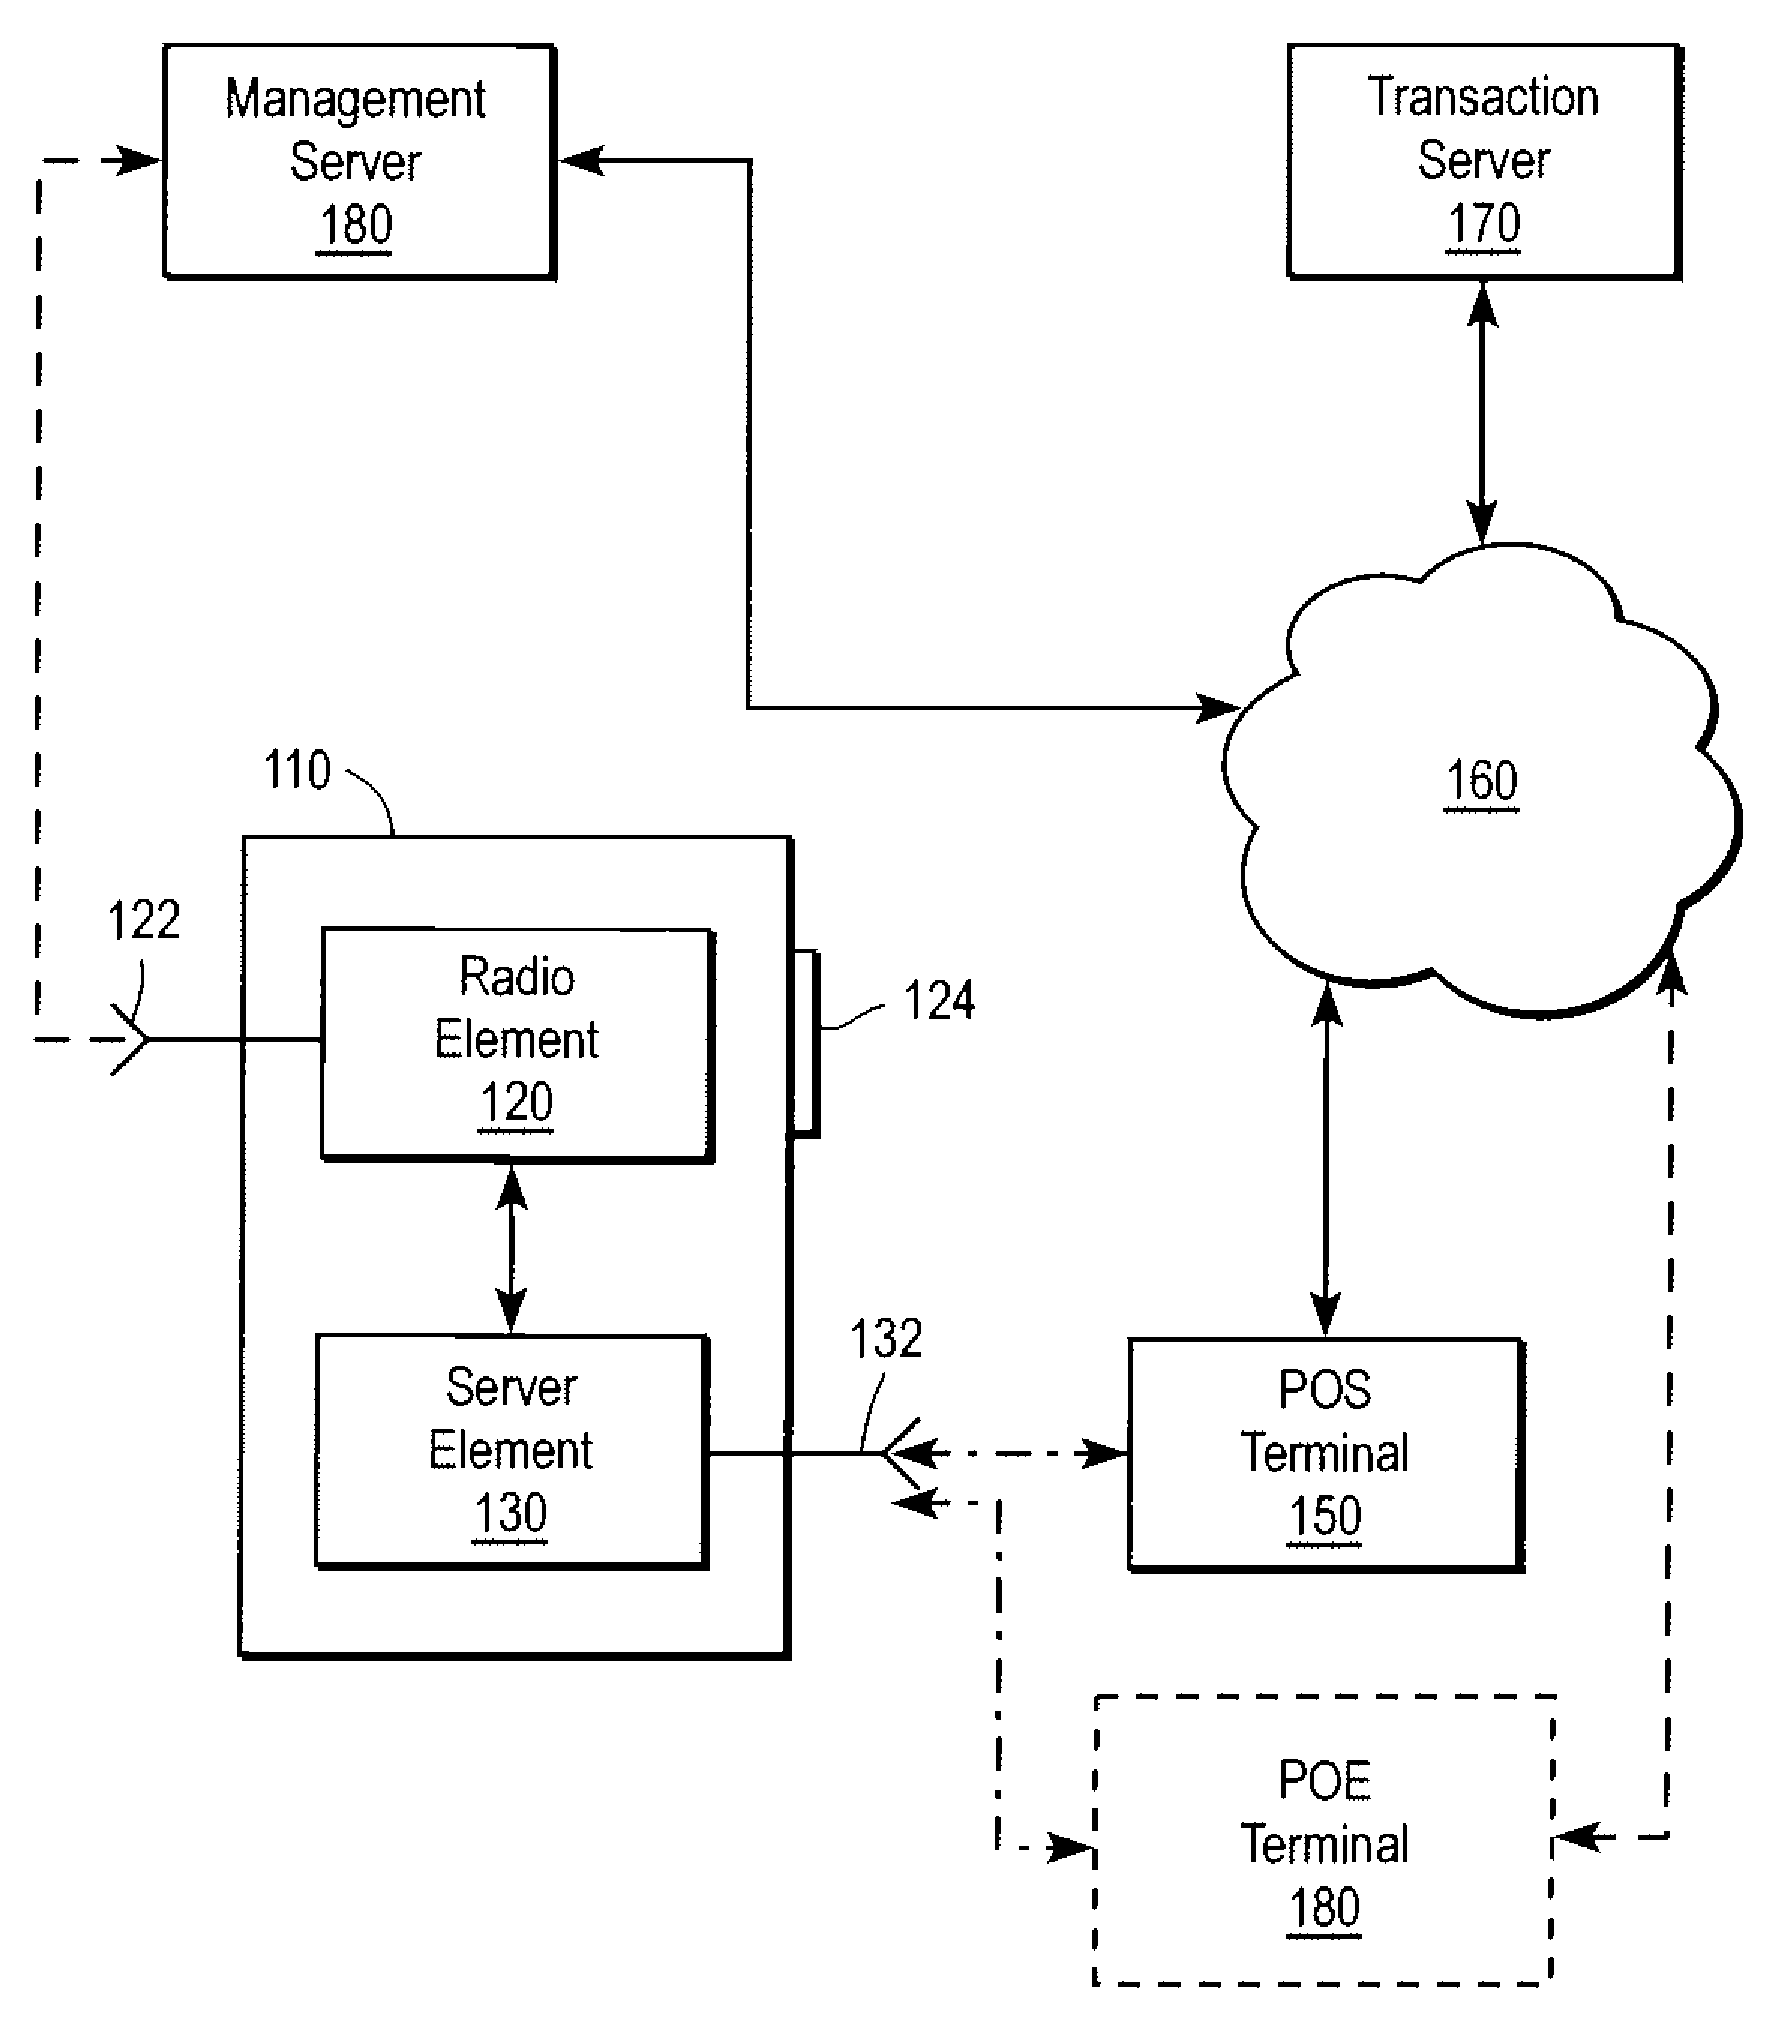 Method And Apparatus For Completing A Transaction Using A Wireless Mobile Communication Channel And Another Communication Channel